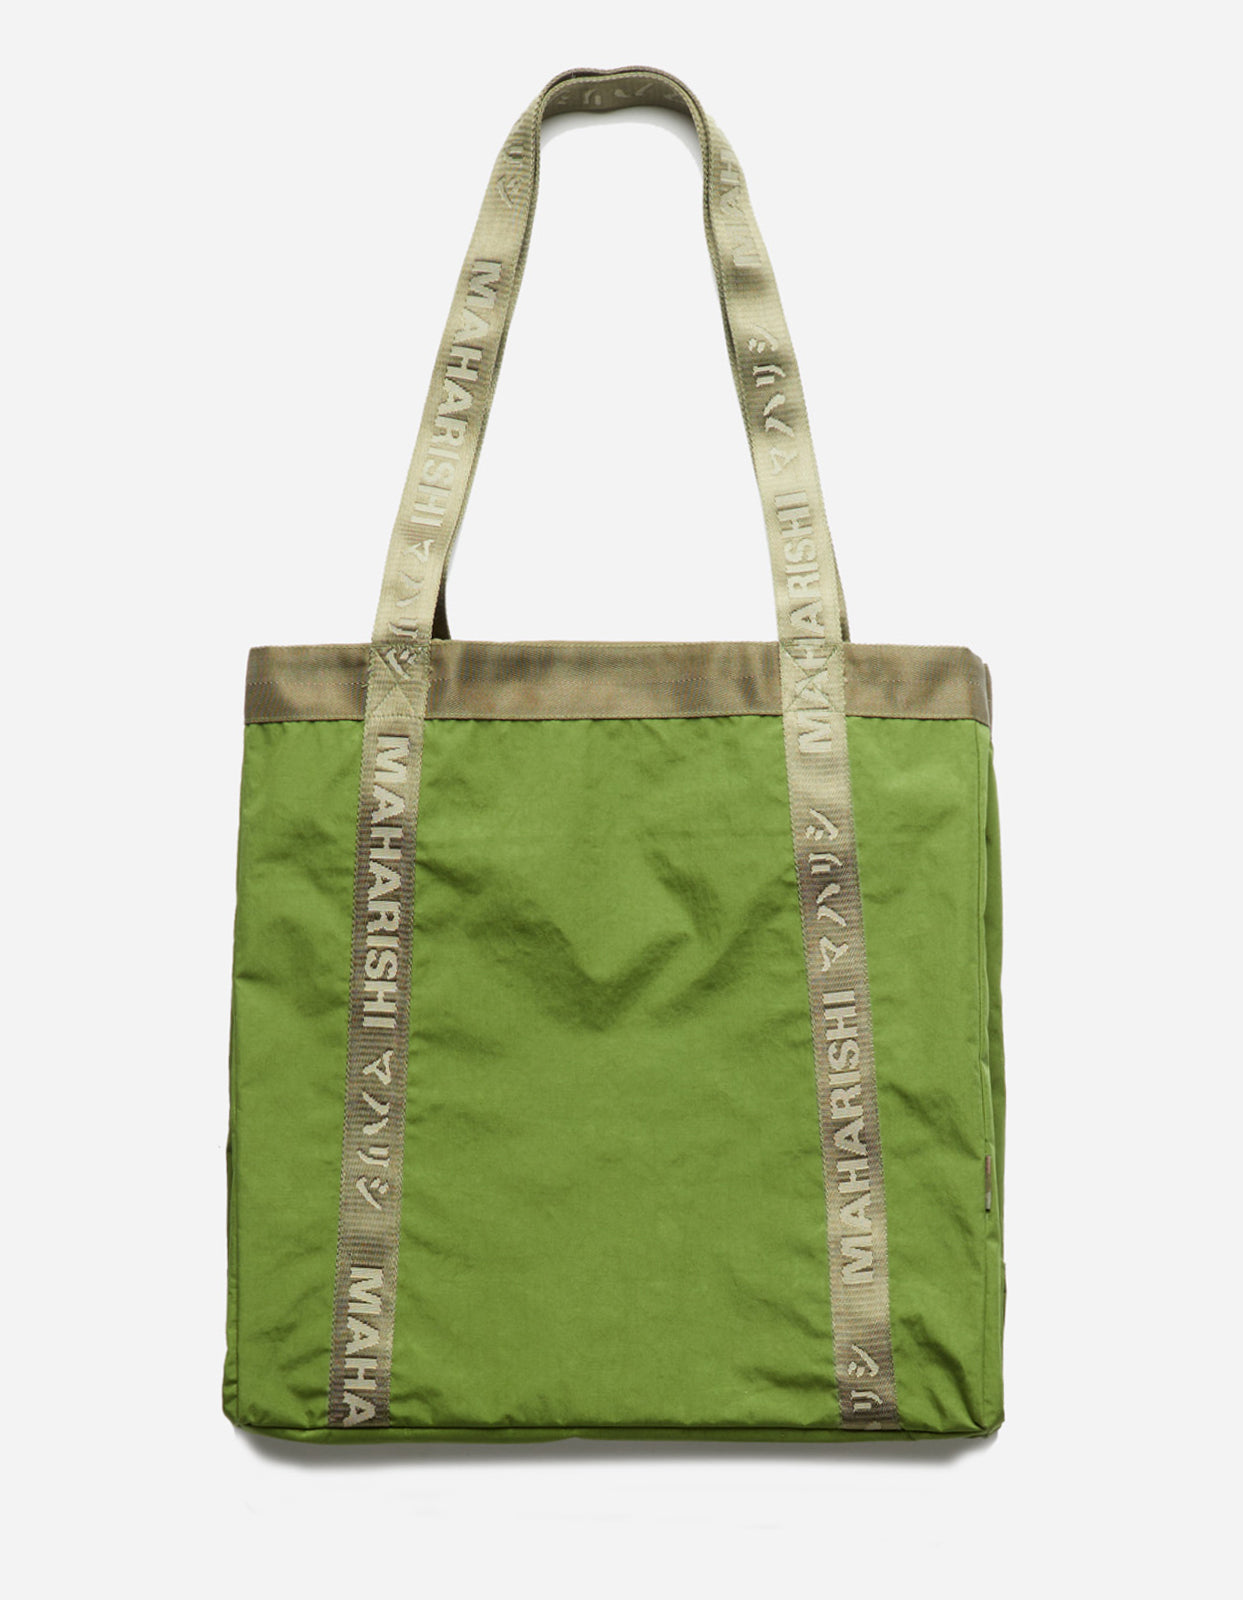 5046 WR Stand Utility Tote Bag Green Shoot